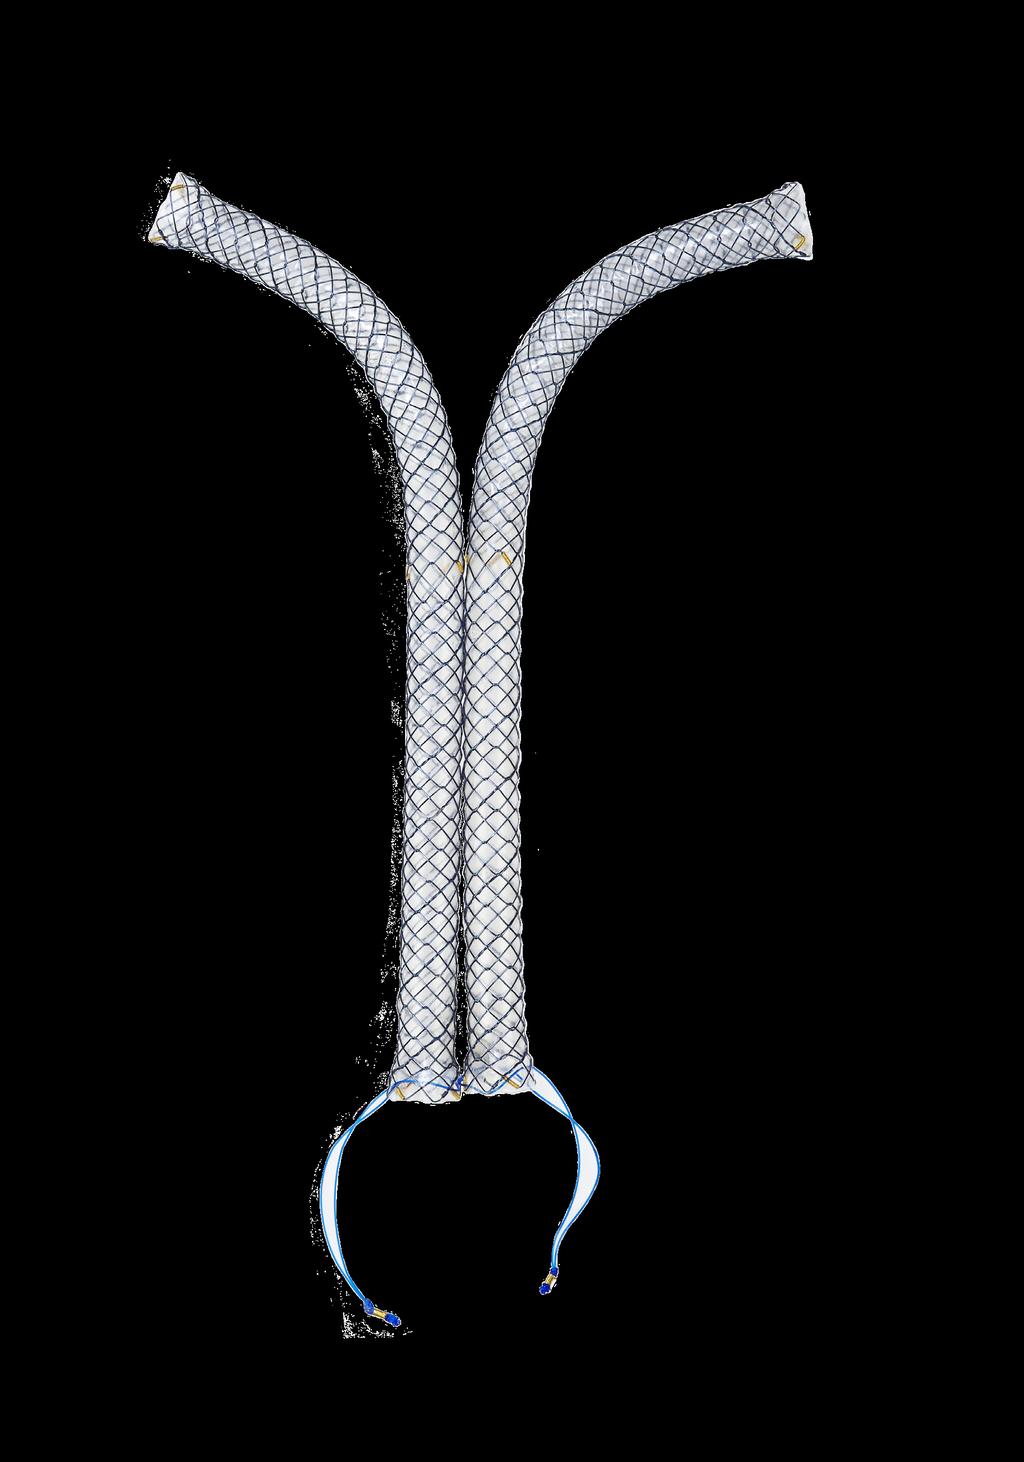 SHCL Stent 2 GOLD R ADI OOPAQUE M AR KER S To allow side-by-side placement in hilar ducts NITINOL METAL MESH To enhance stent patency SHCL Covered Biliary Stent Indication: This stent is indicated